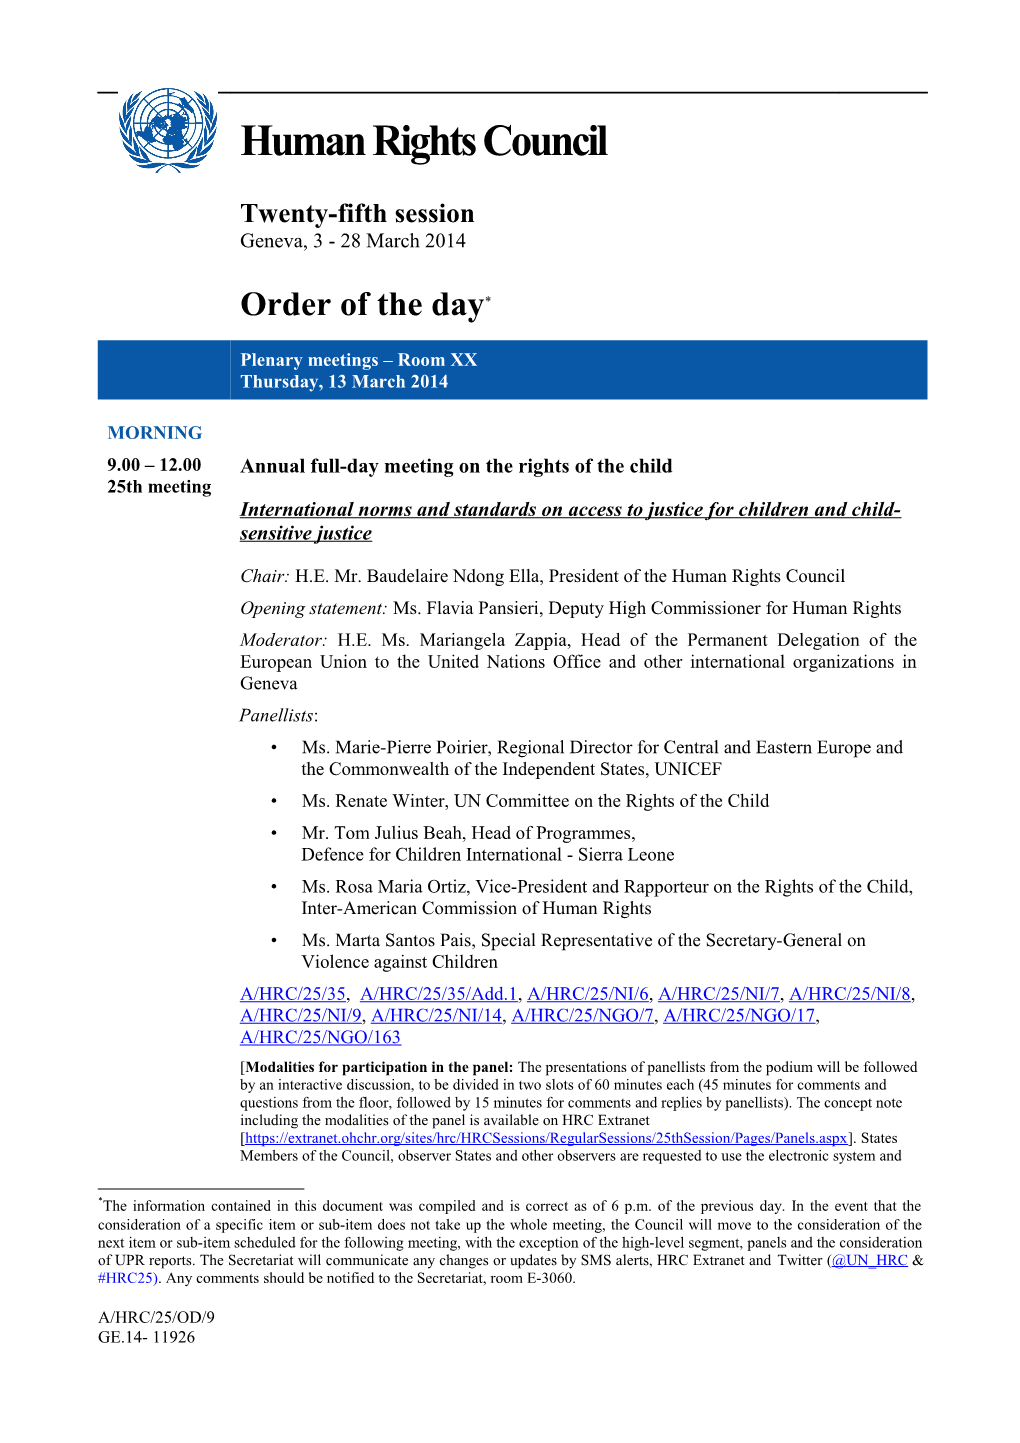 Thrusday, 13 March 2014, Order of the Day in English (Word)